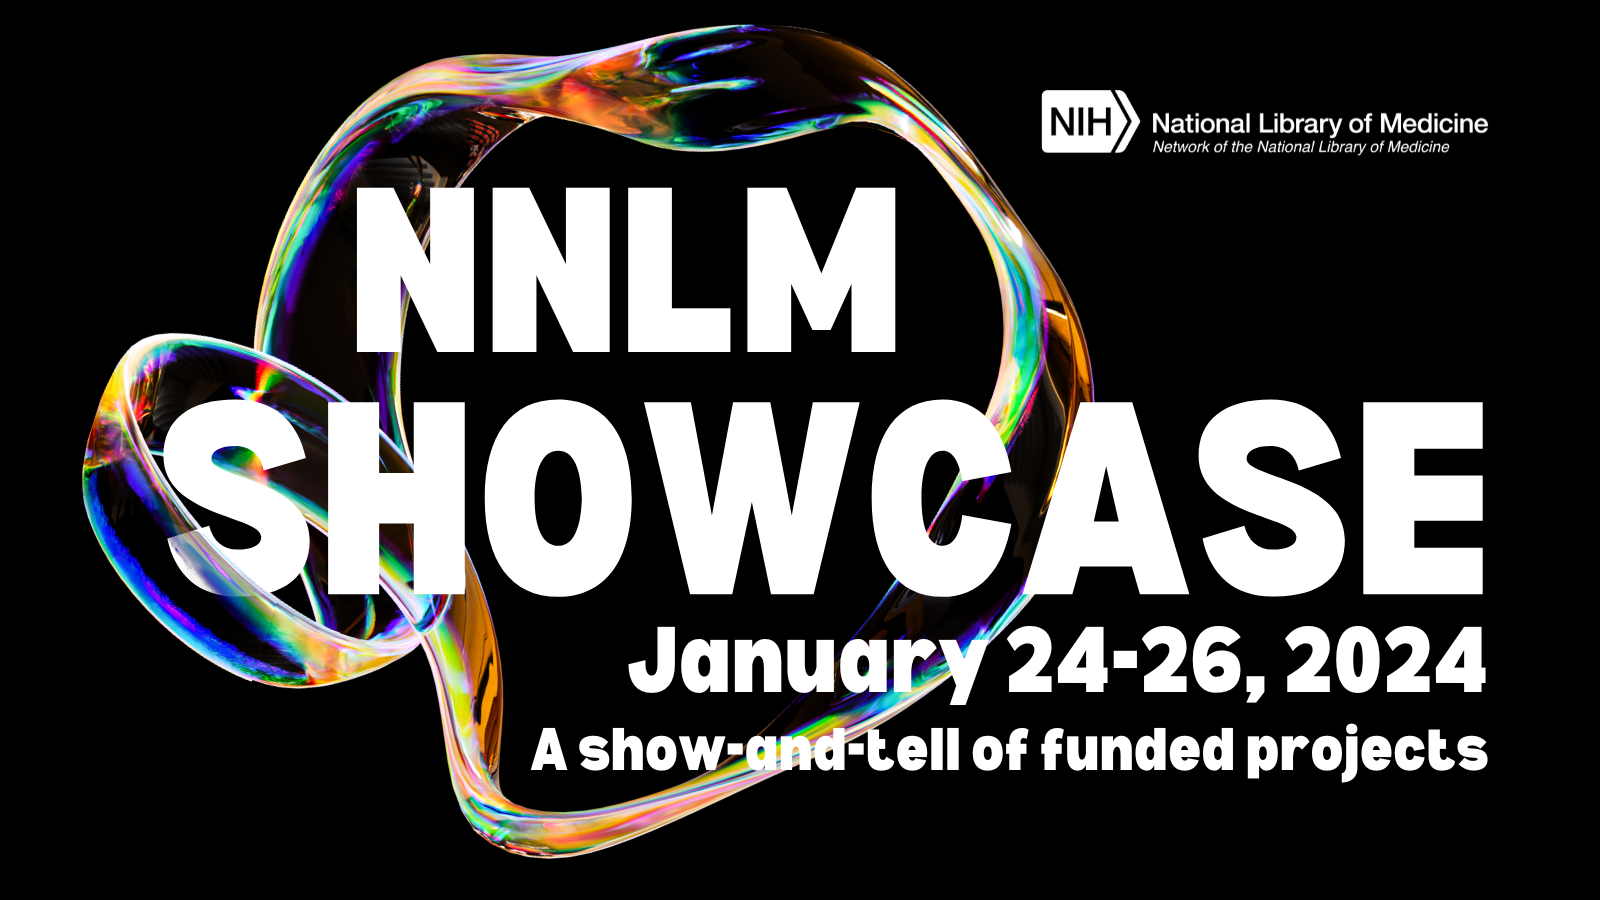 NNLM Showcase January 24-26 - A show and tell of funded projects